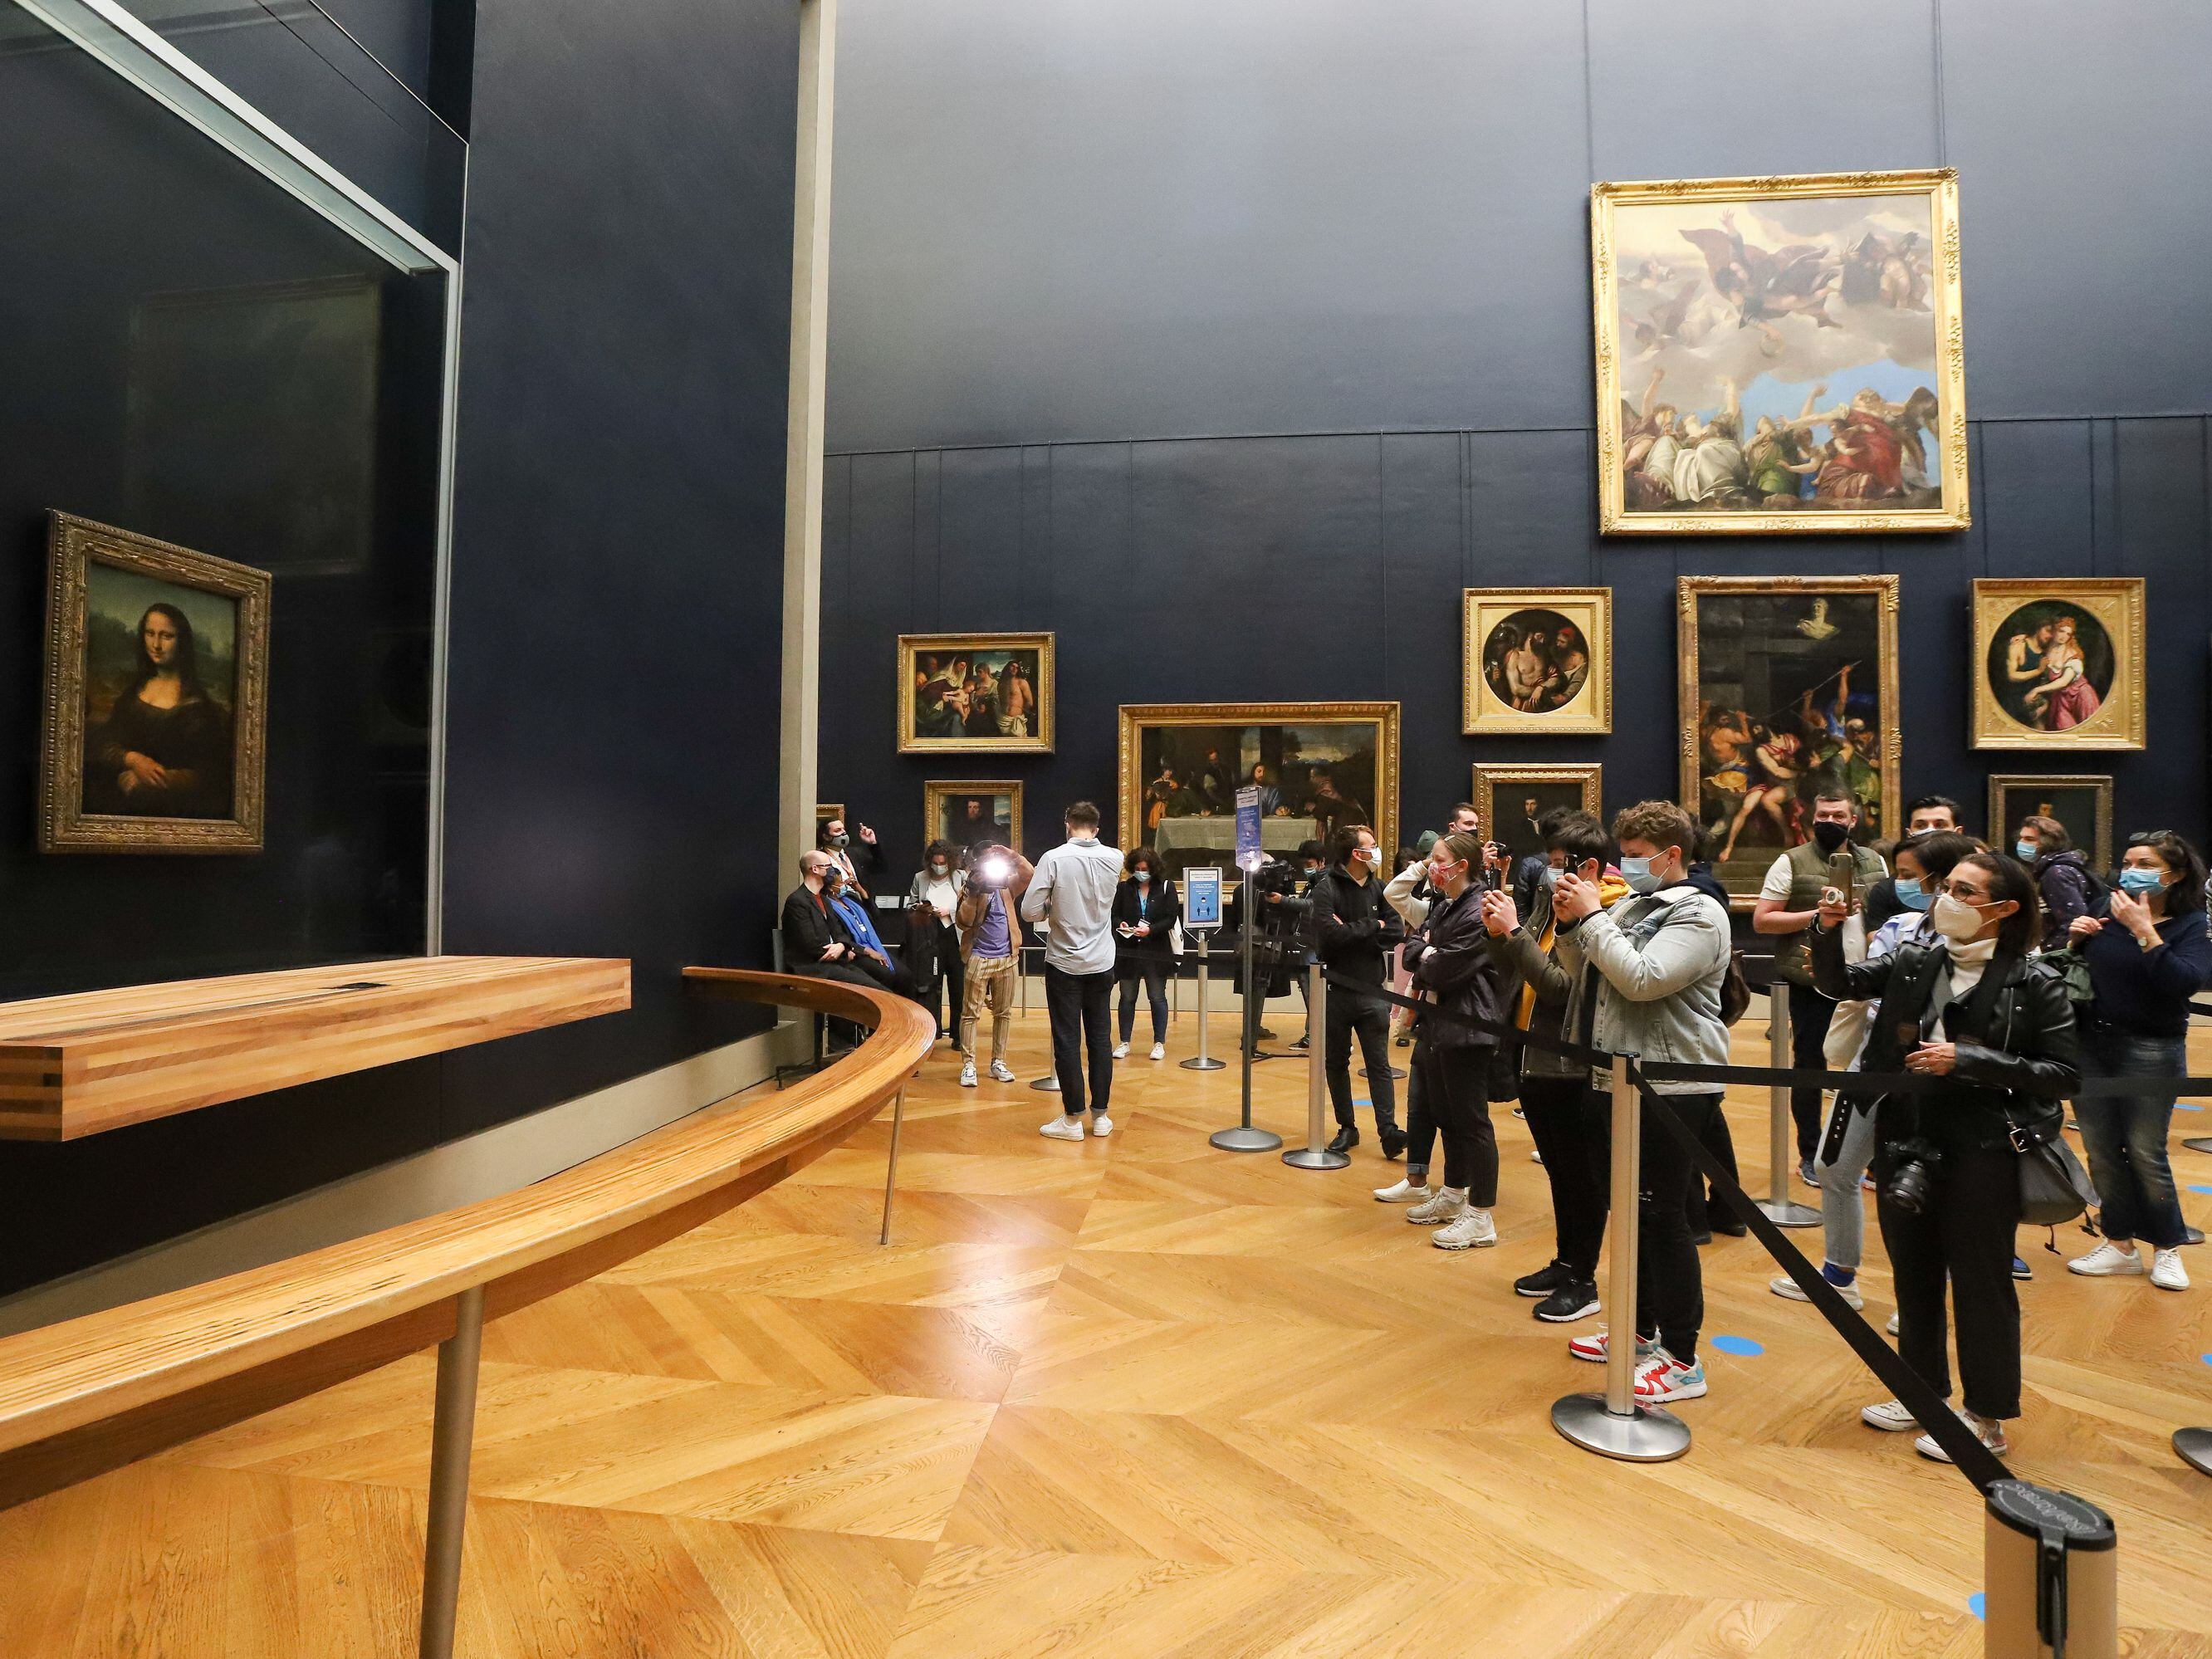 A visitor photographs the painting the Mona Lisa by Italian artist Leonardo Da Vinci on display in a gallery at the Louvre on May 19, 2021 in Paris.